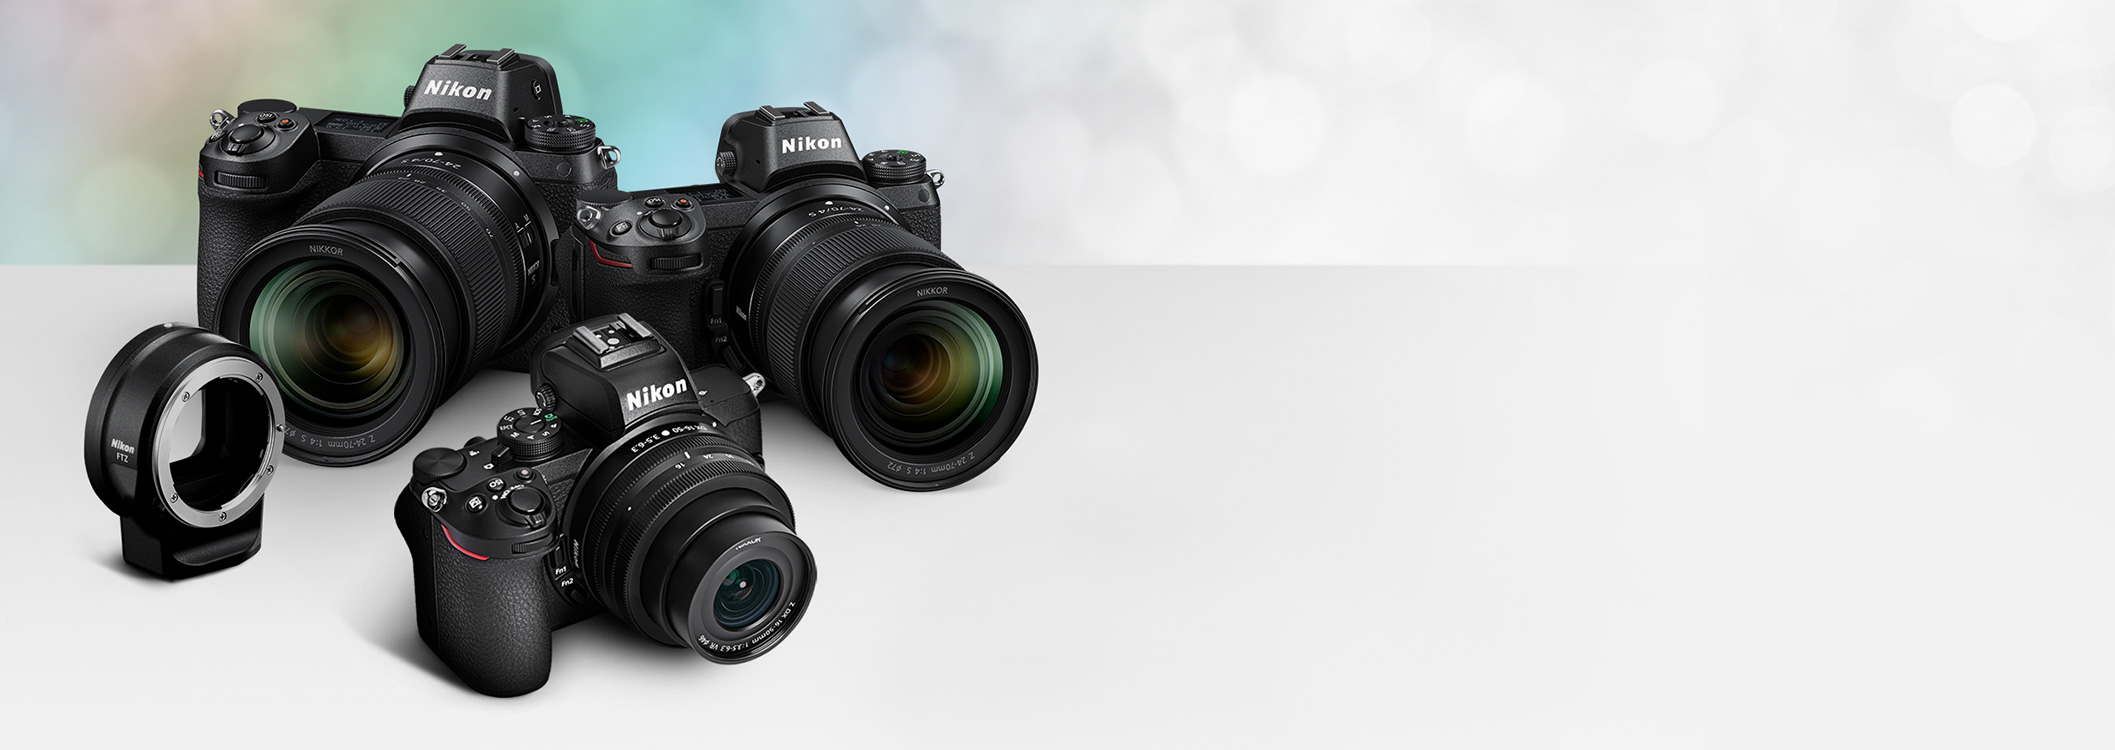 Digital Cameras | DSLRs, Mirrorless and Compact Cameras & Accessories ...